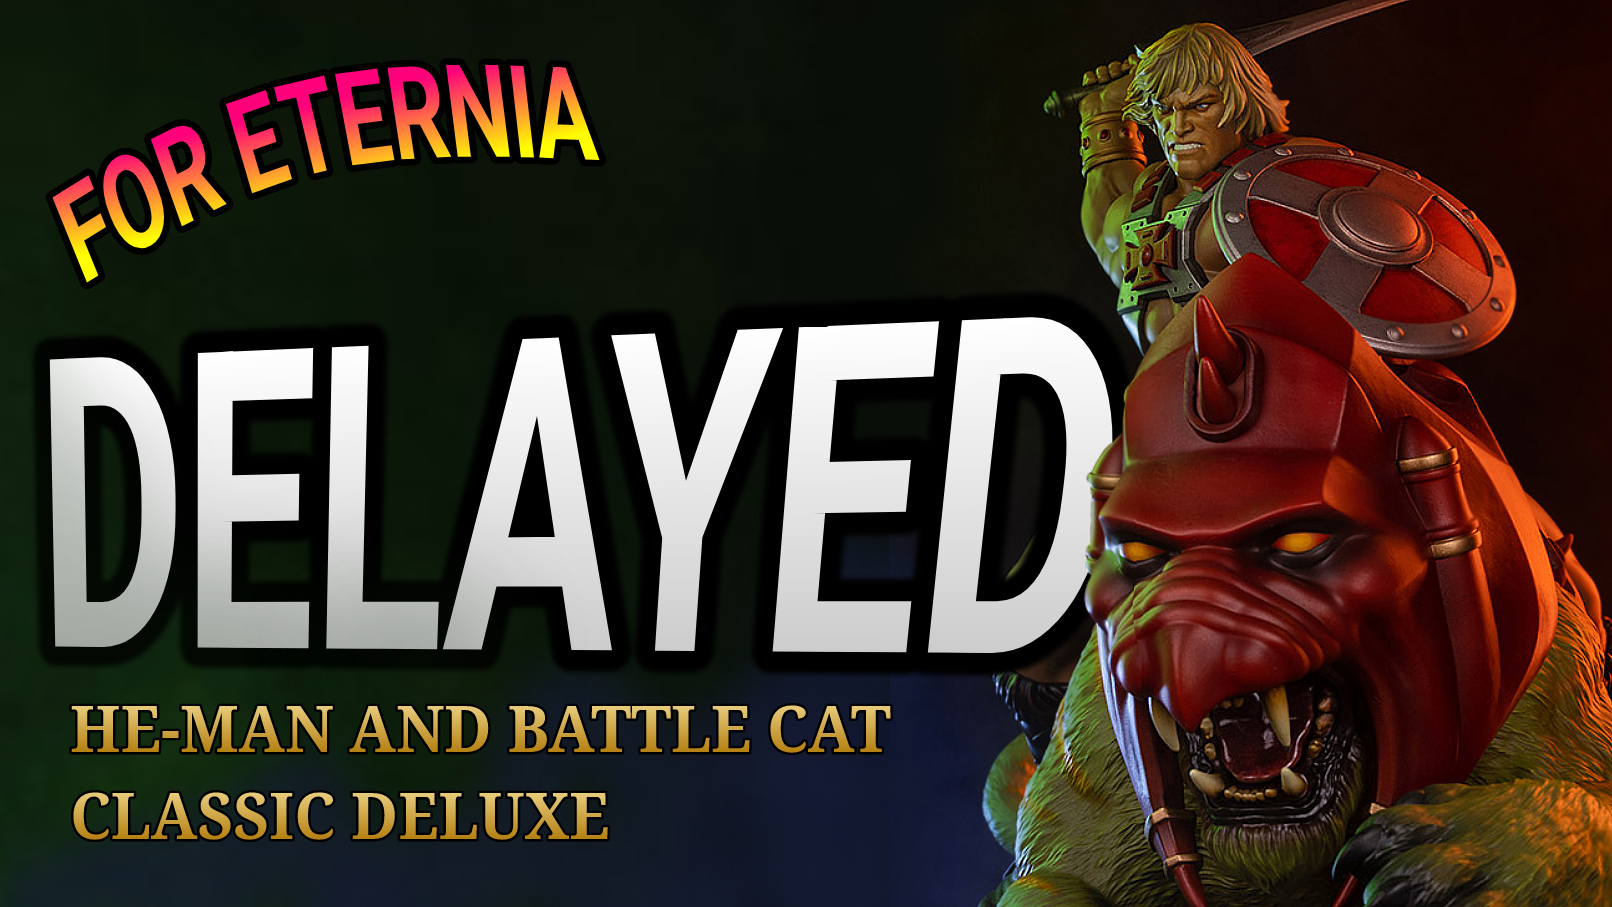 Cursed Delay! The He-Man and Battle Cat Classic Deluxe Maquette by Tweeterhead is pushed back